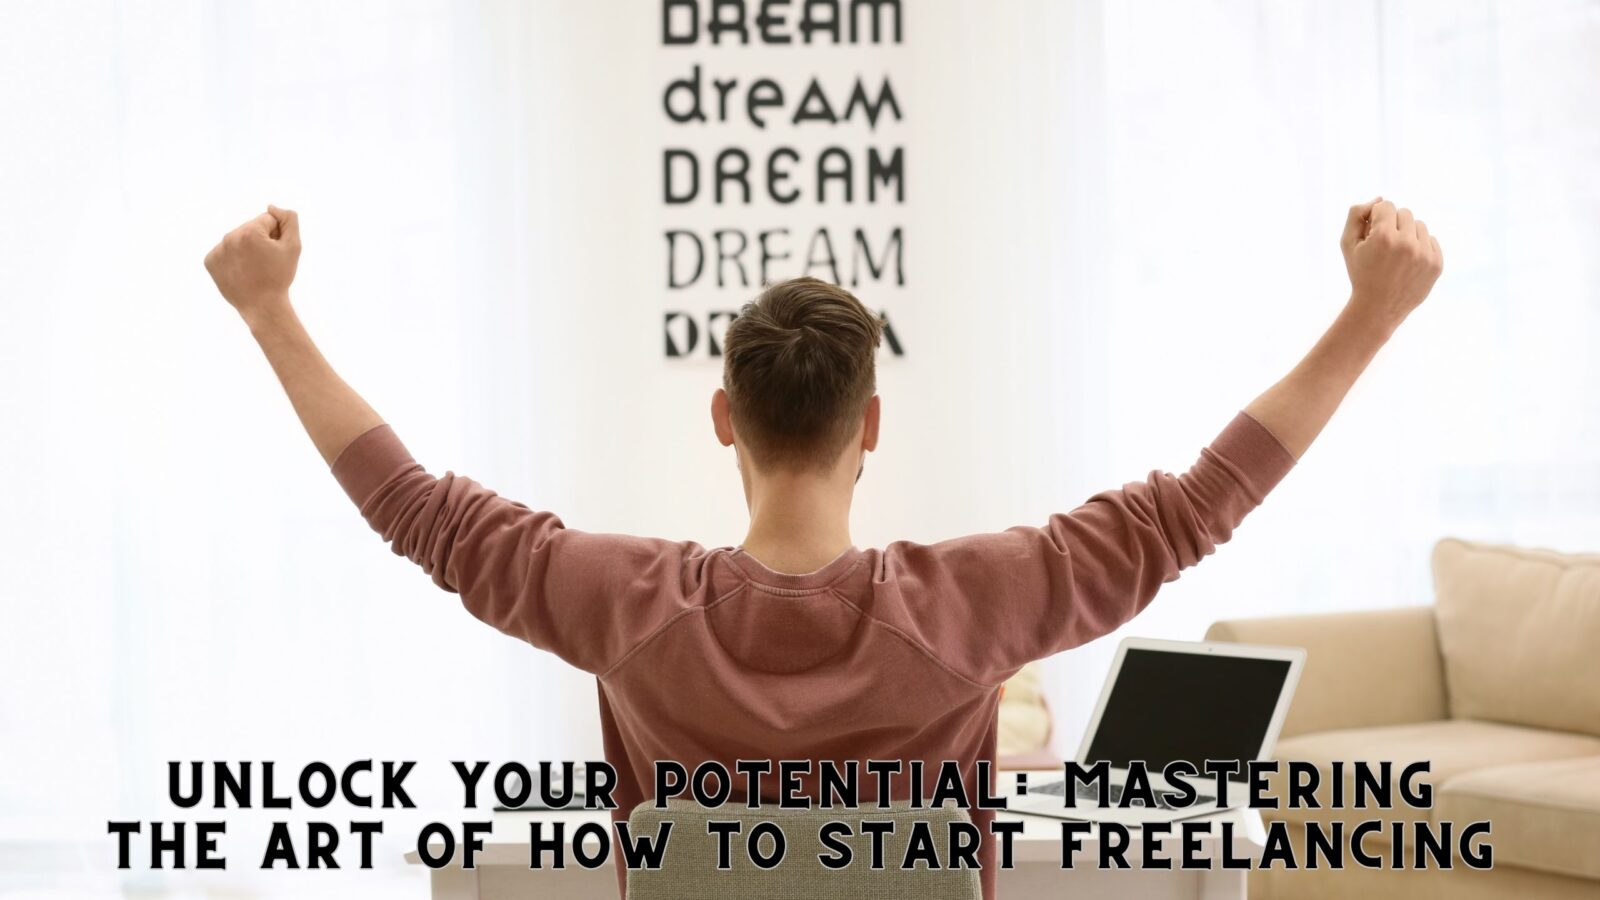 Unlock Your Potential: Mastering the Art of How to Start Freelancing